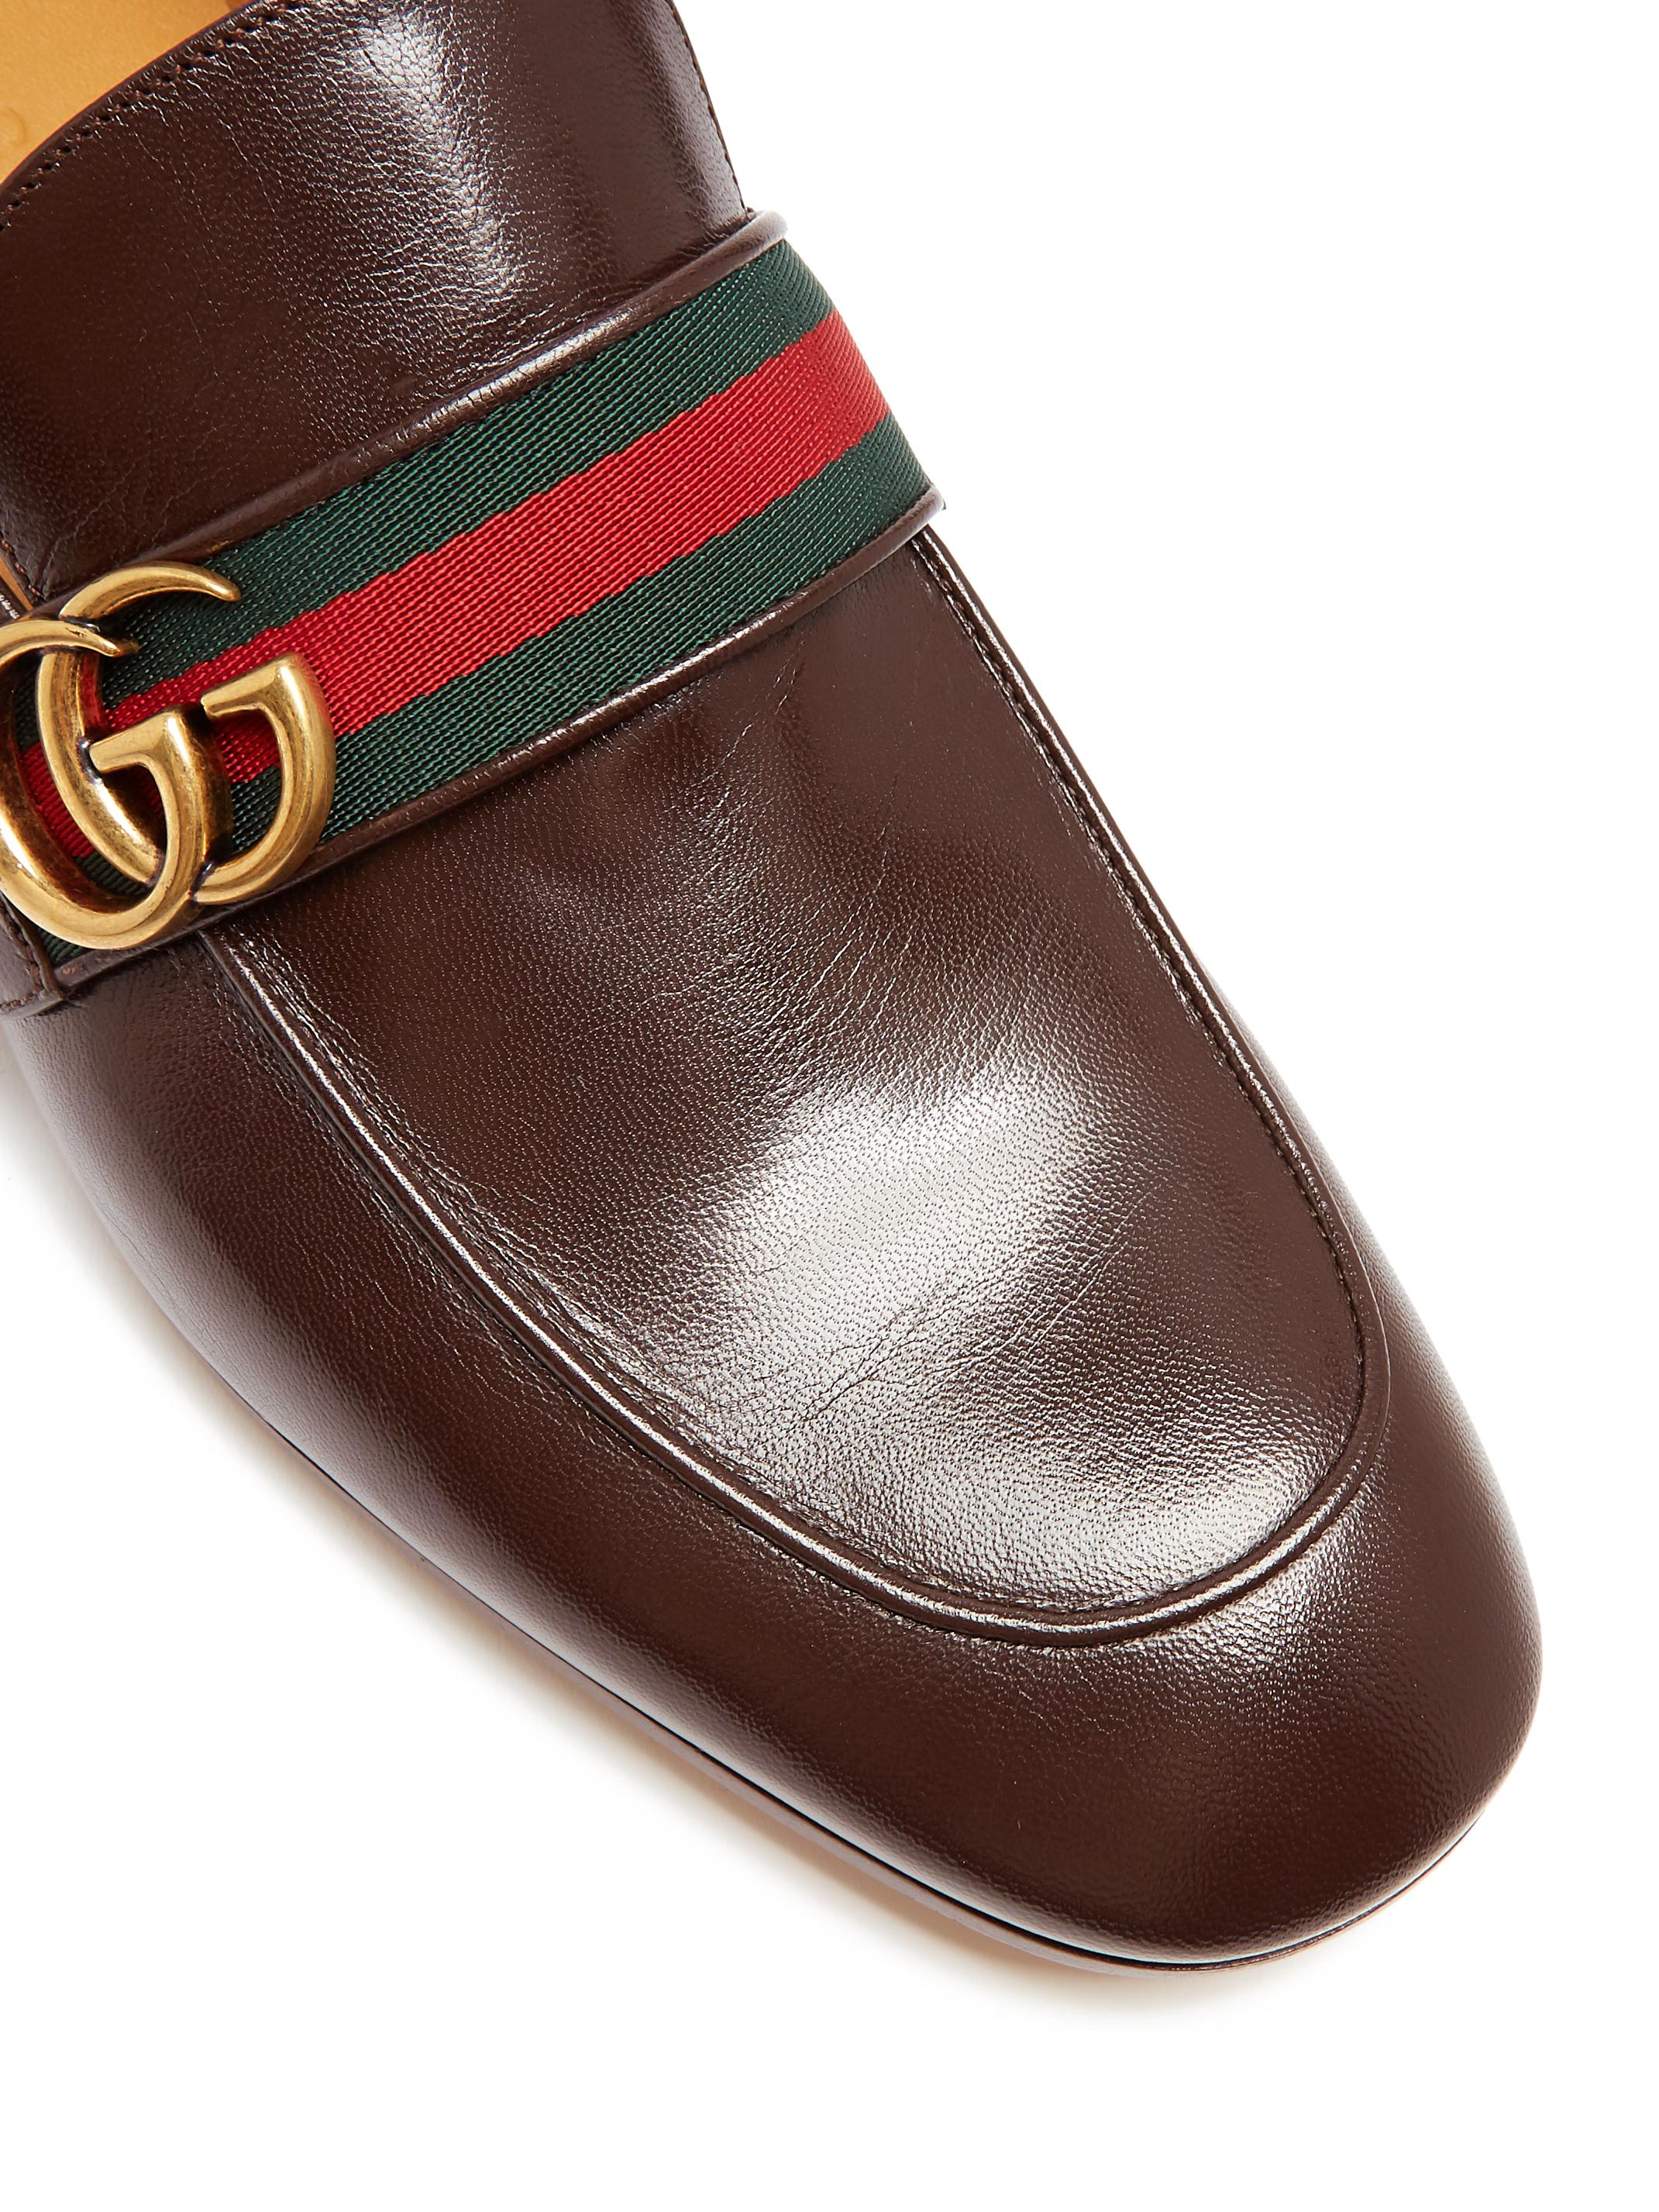 Gucci Donnie Loafer Brown Spain, SAVE 33% - lutheranems.com